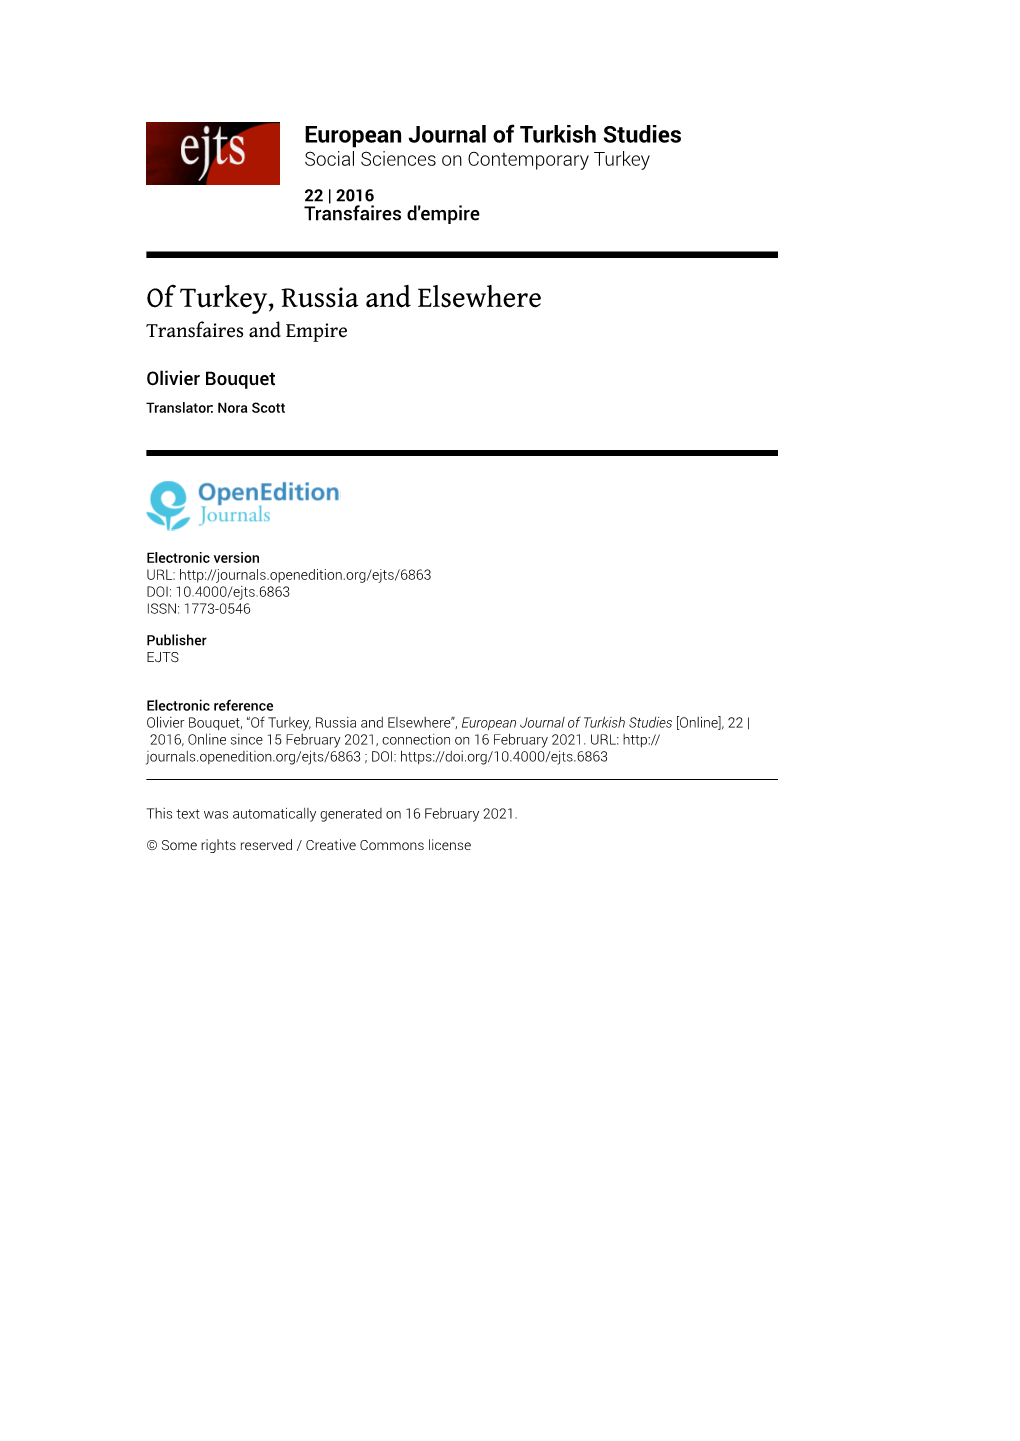 European Journal of Turkish Studies, 22 | 2016 of Turkey, Russia and Elsewhere 2